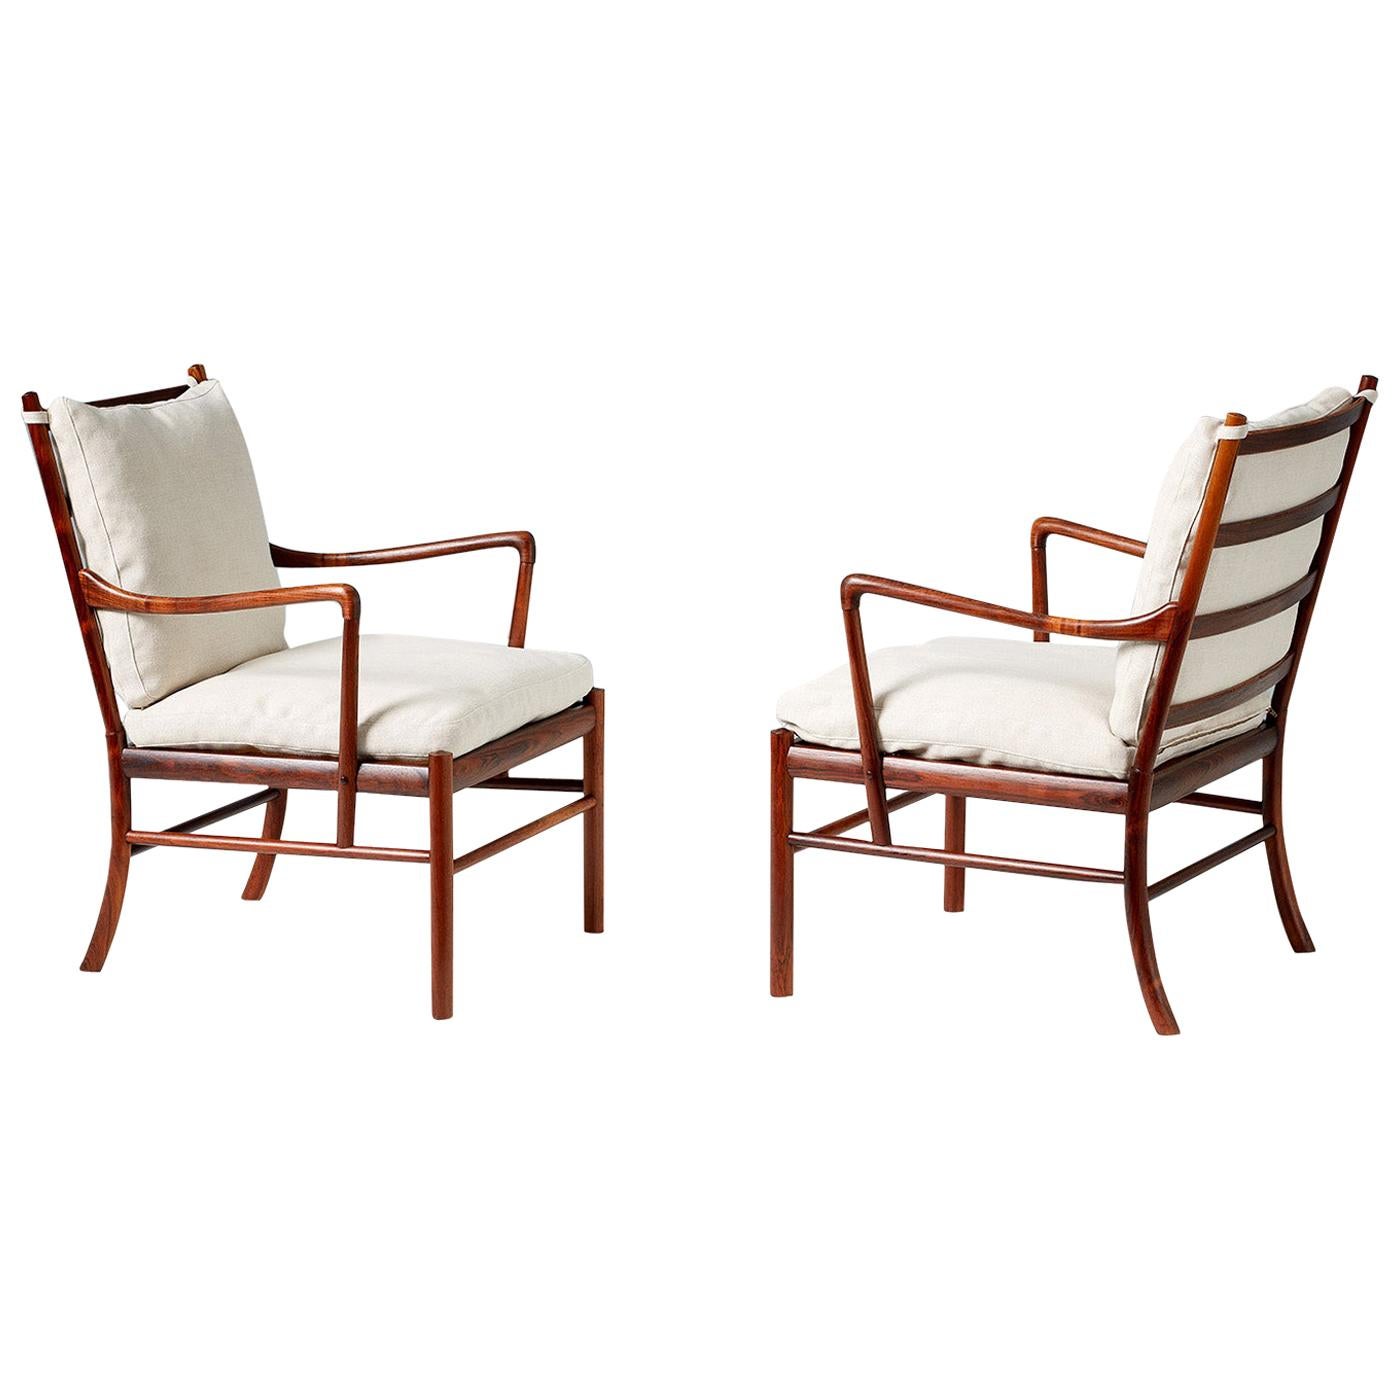 Ole Wanscher Pair of Vintage Rosewood Colonial Chairs, 1950s For Sale